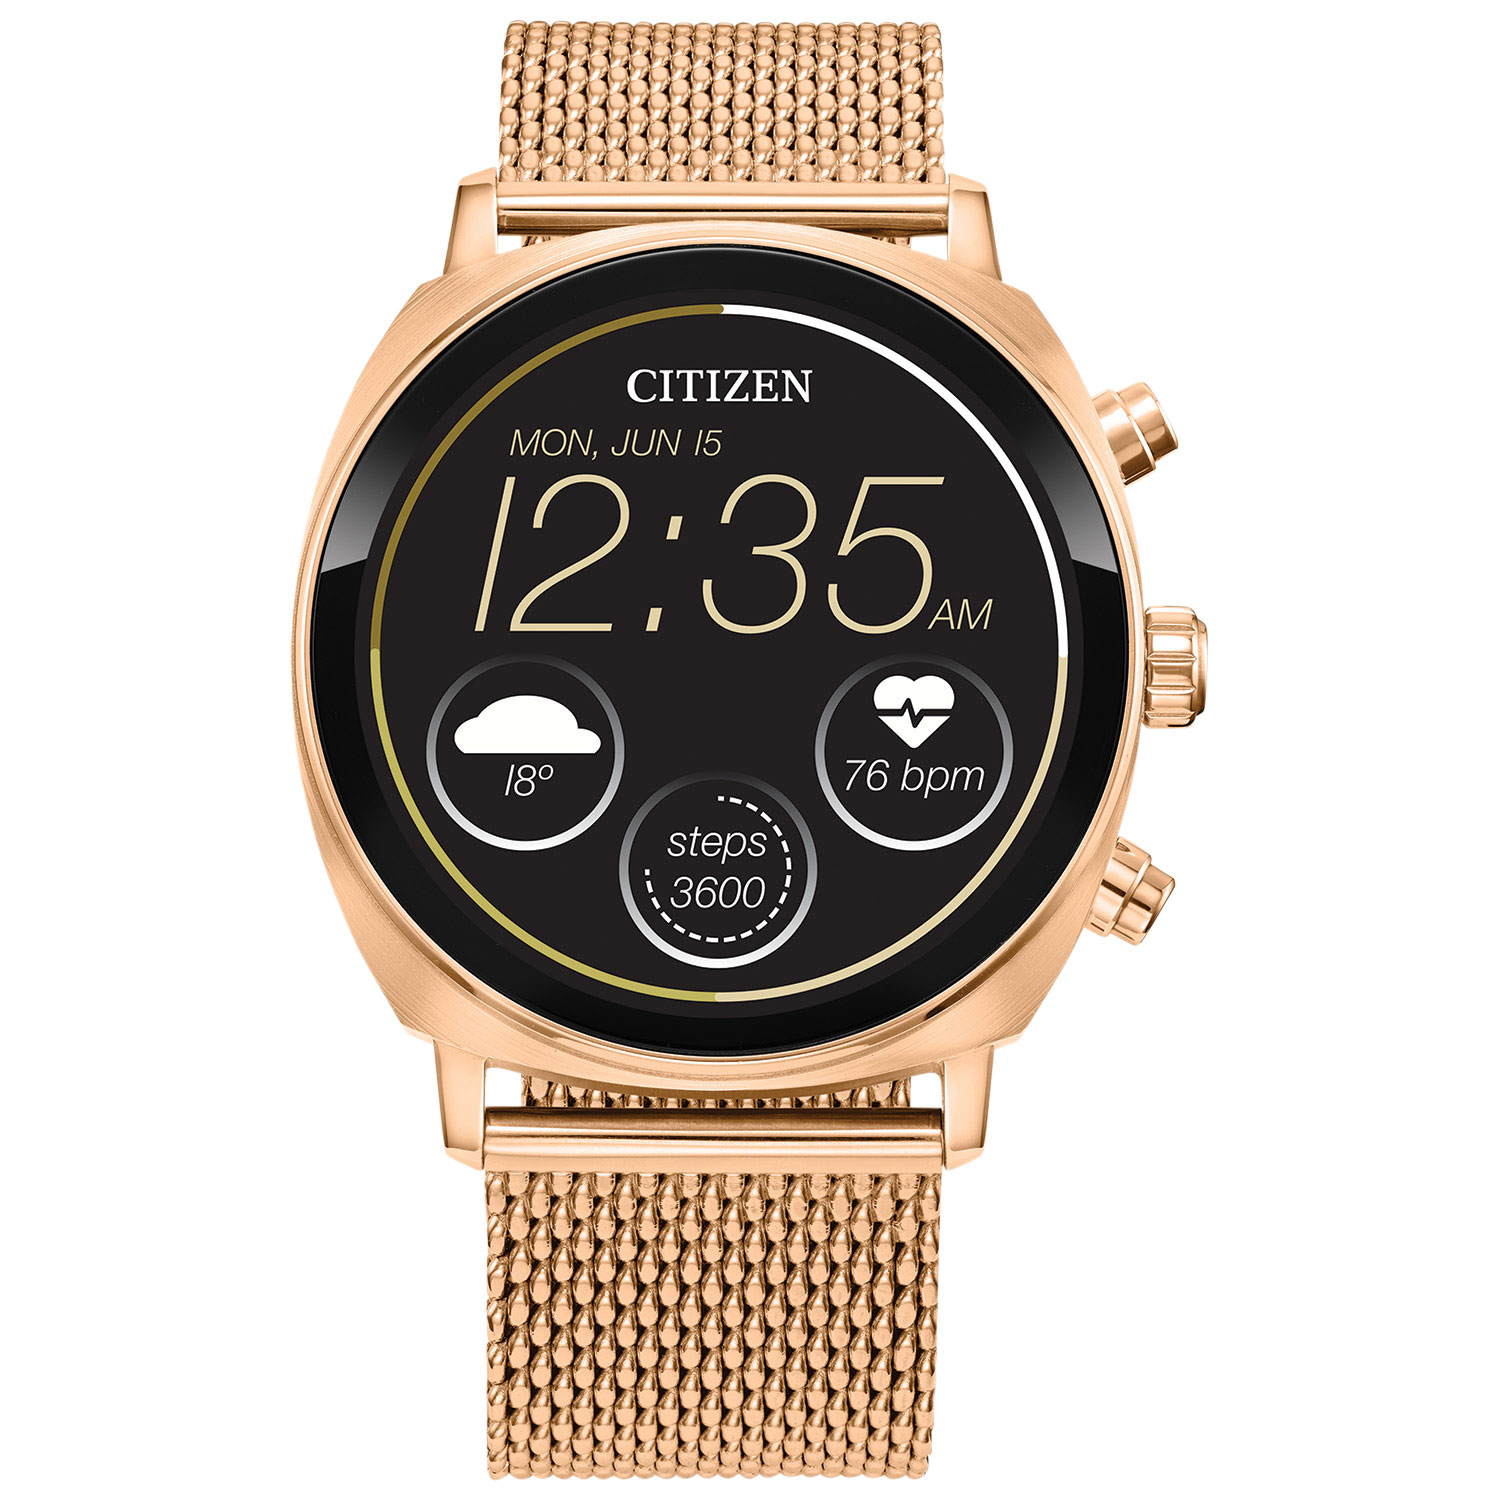 Citizen CZ Smart PQ2 Casual 41mm Smartwatch with Heart Rate Monitor - Rose-Gold Tone Mesh